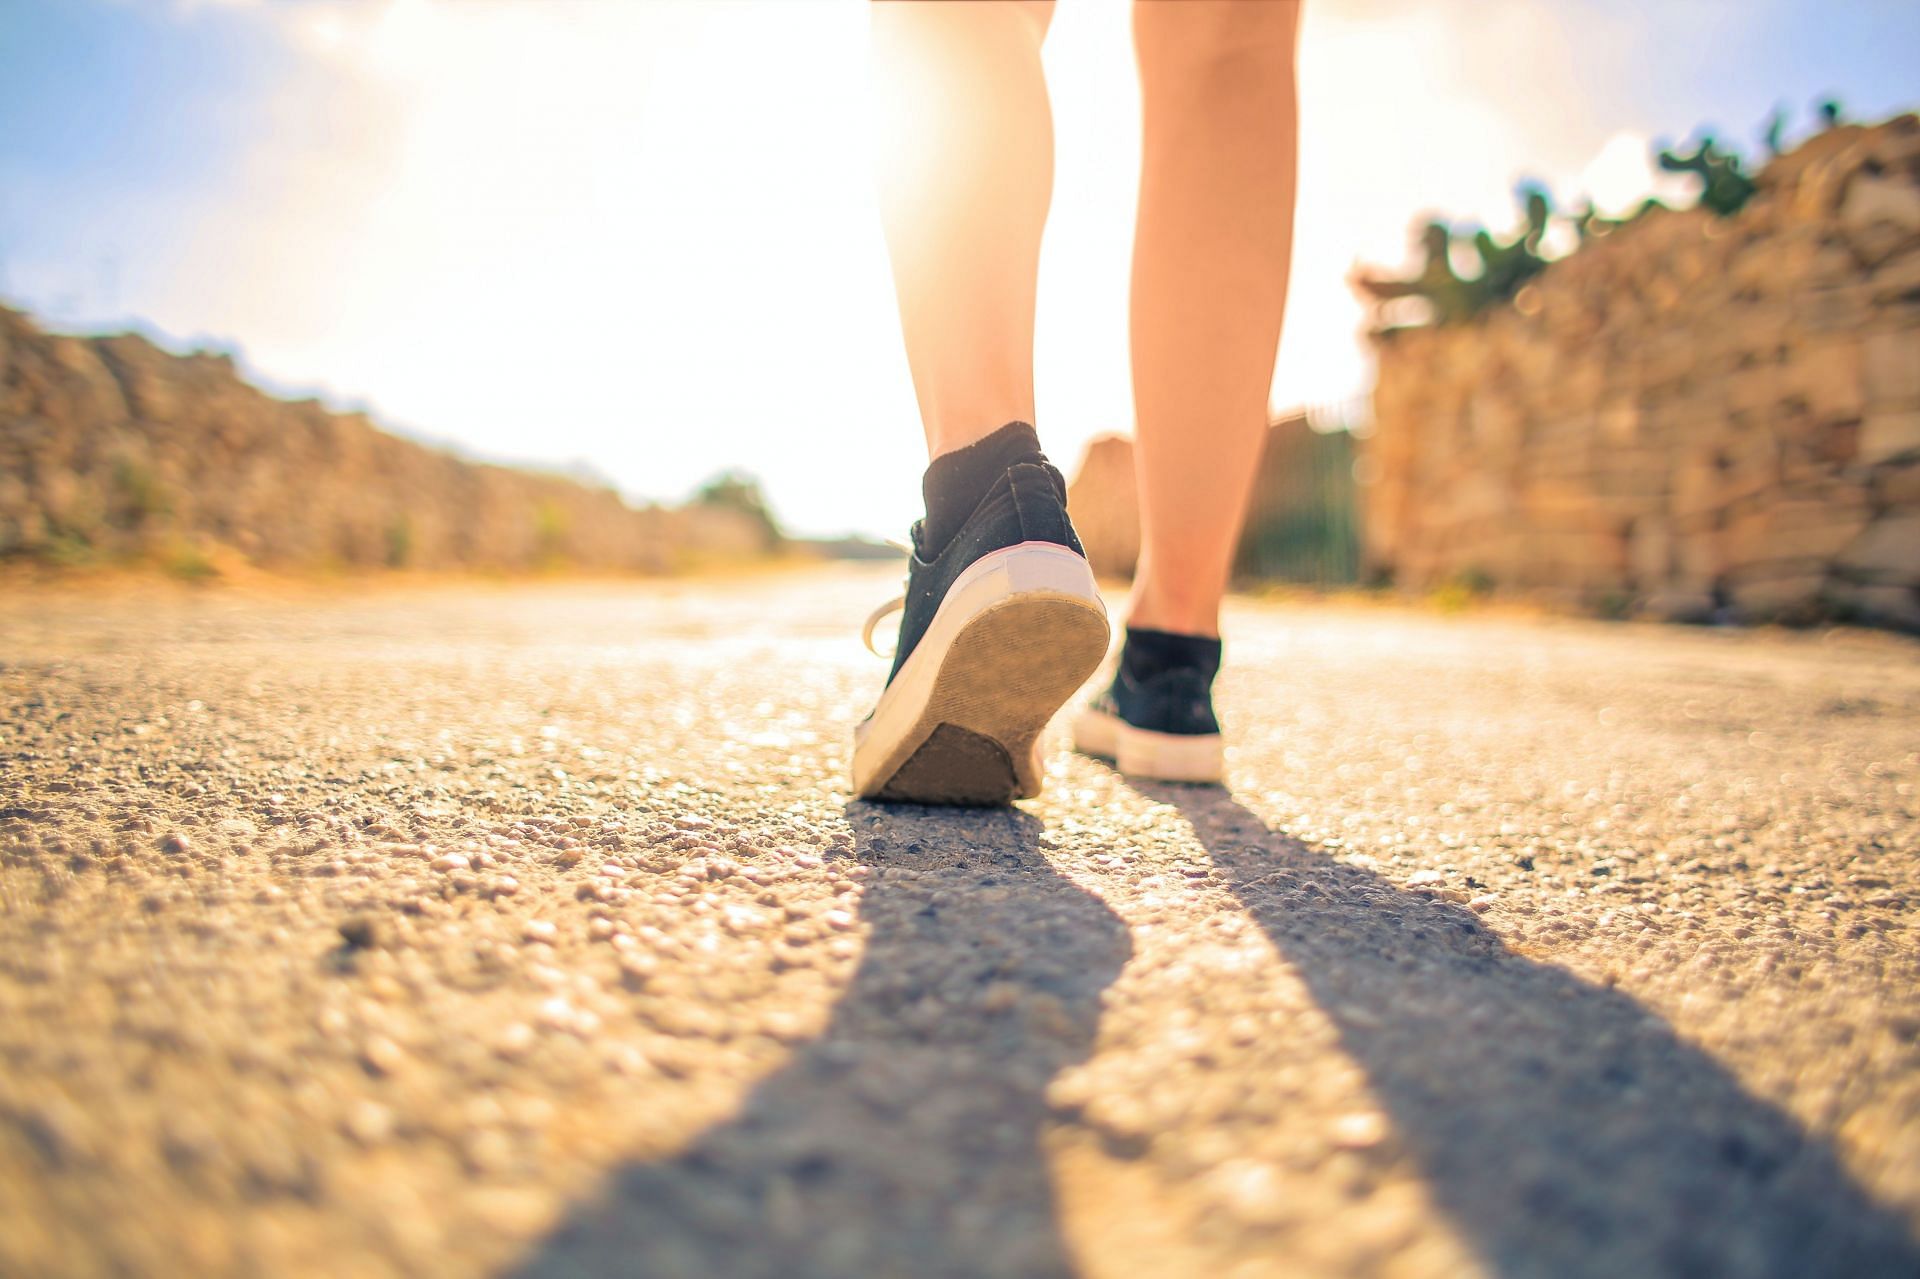 Strong calf muscles help in jumping, running and lifting (Image via Pexels/ Andrea Piacquadio)